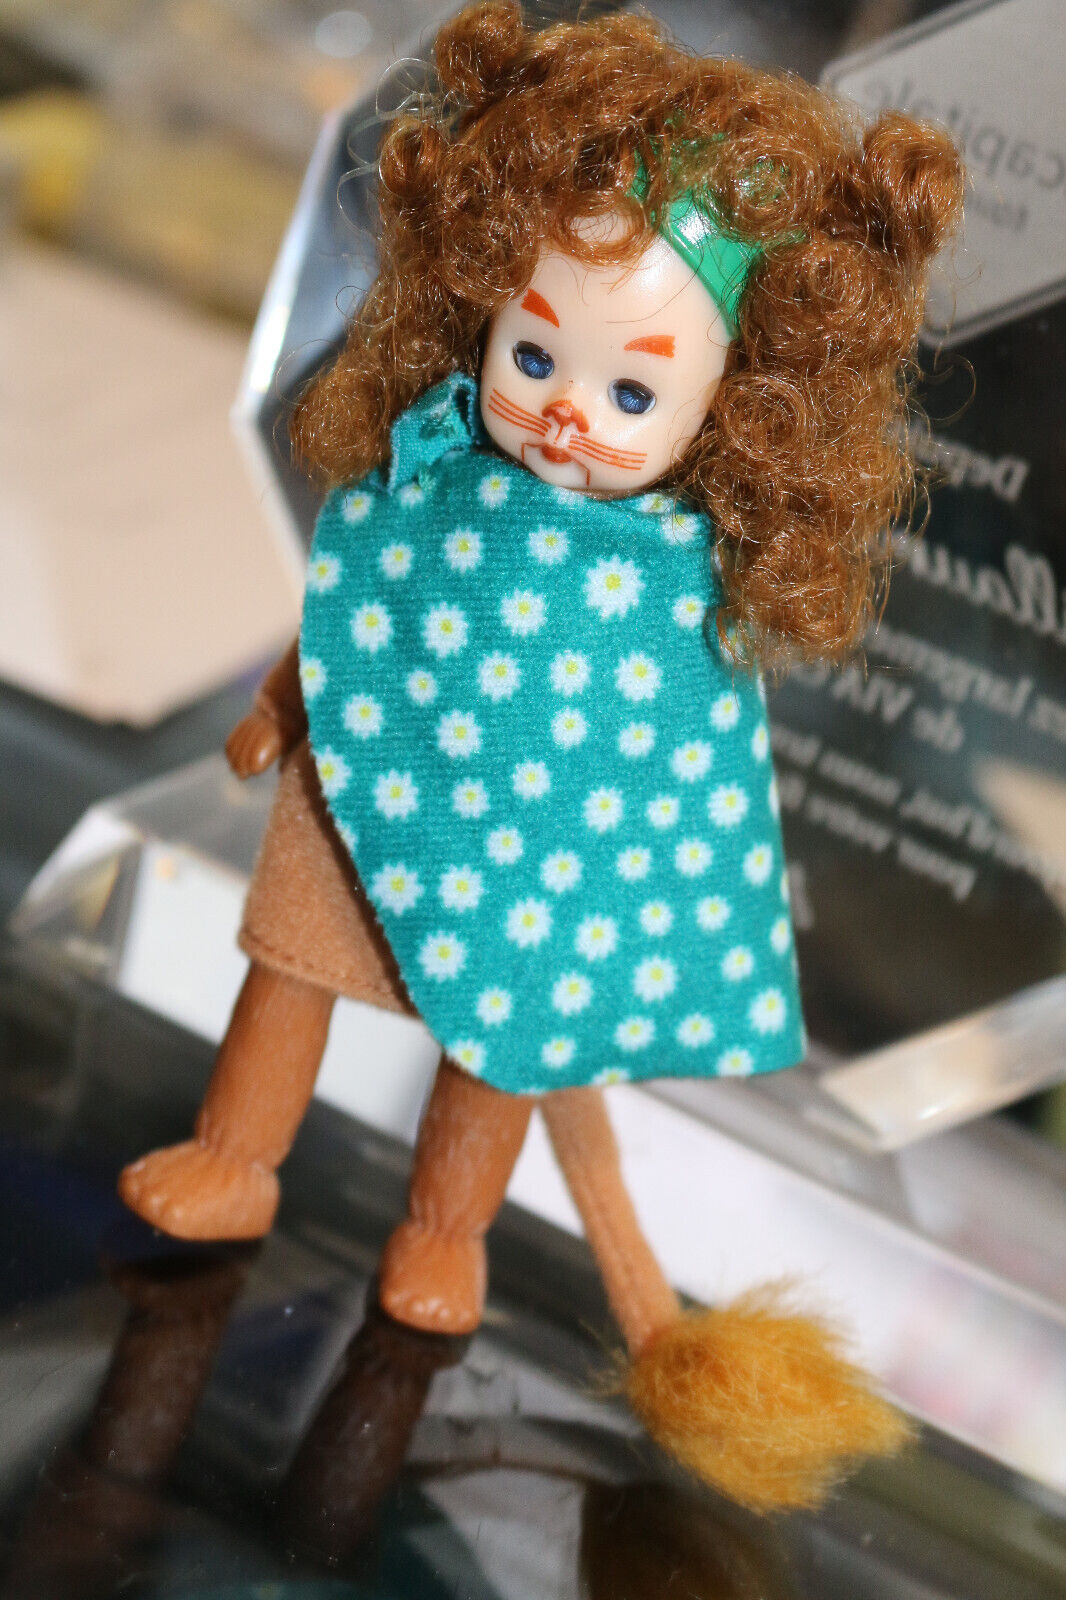 2008 Mcdonalds Happy Meal Madame Alexander Doll Cowardly Lion Wizard Of Oz #4